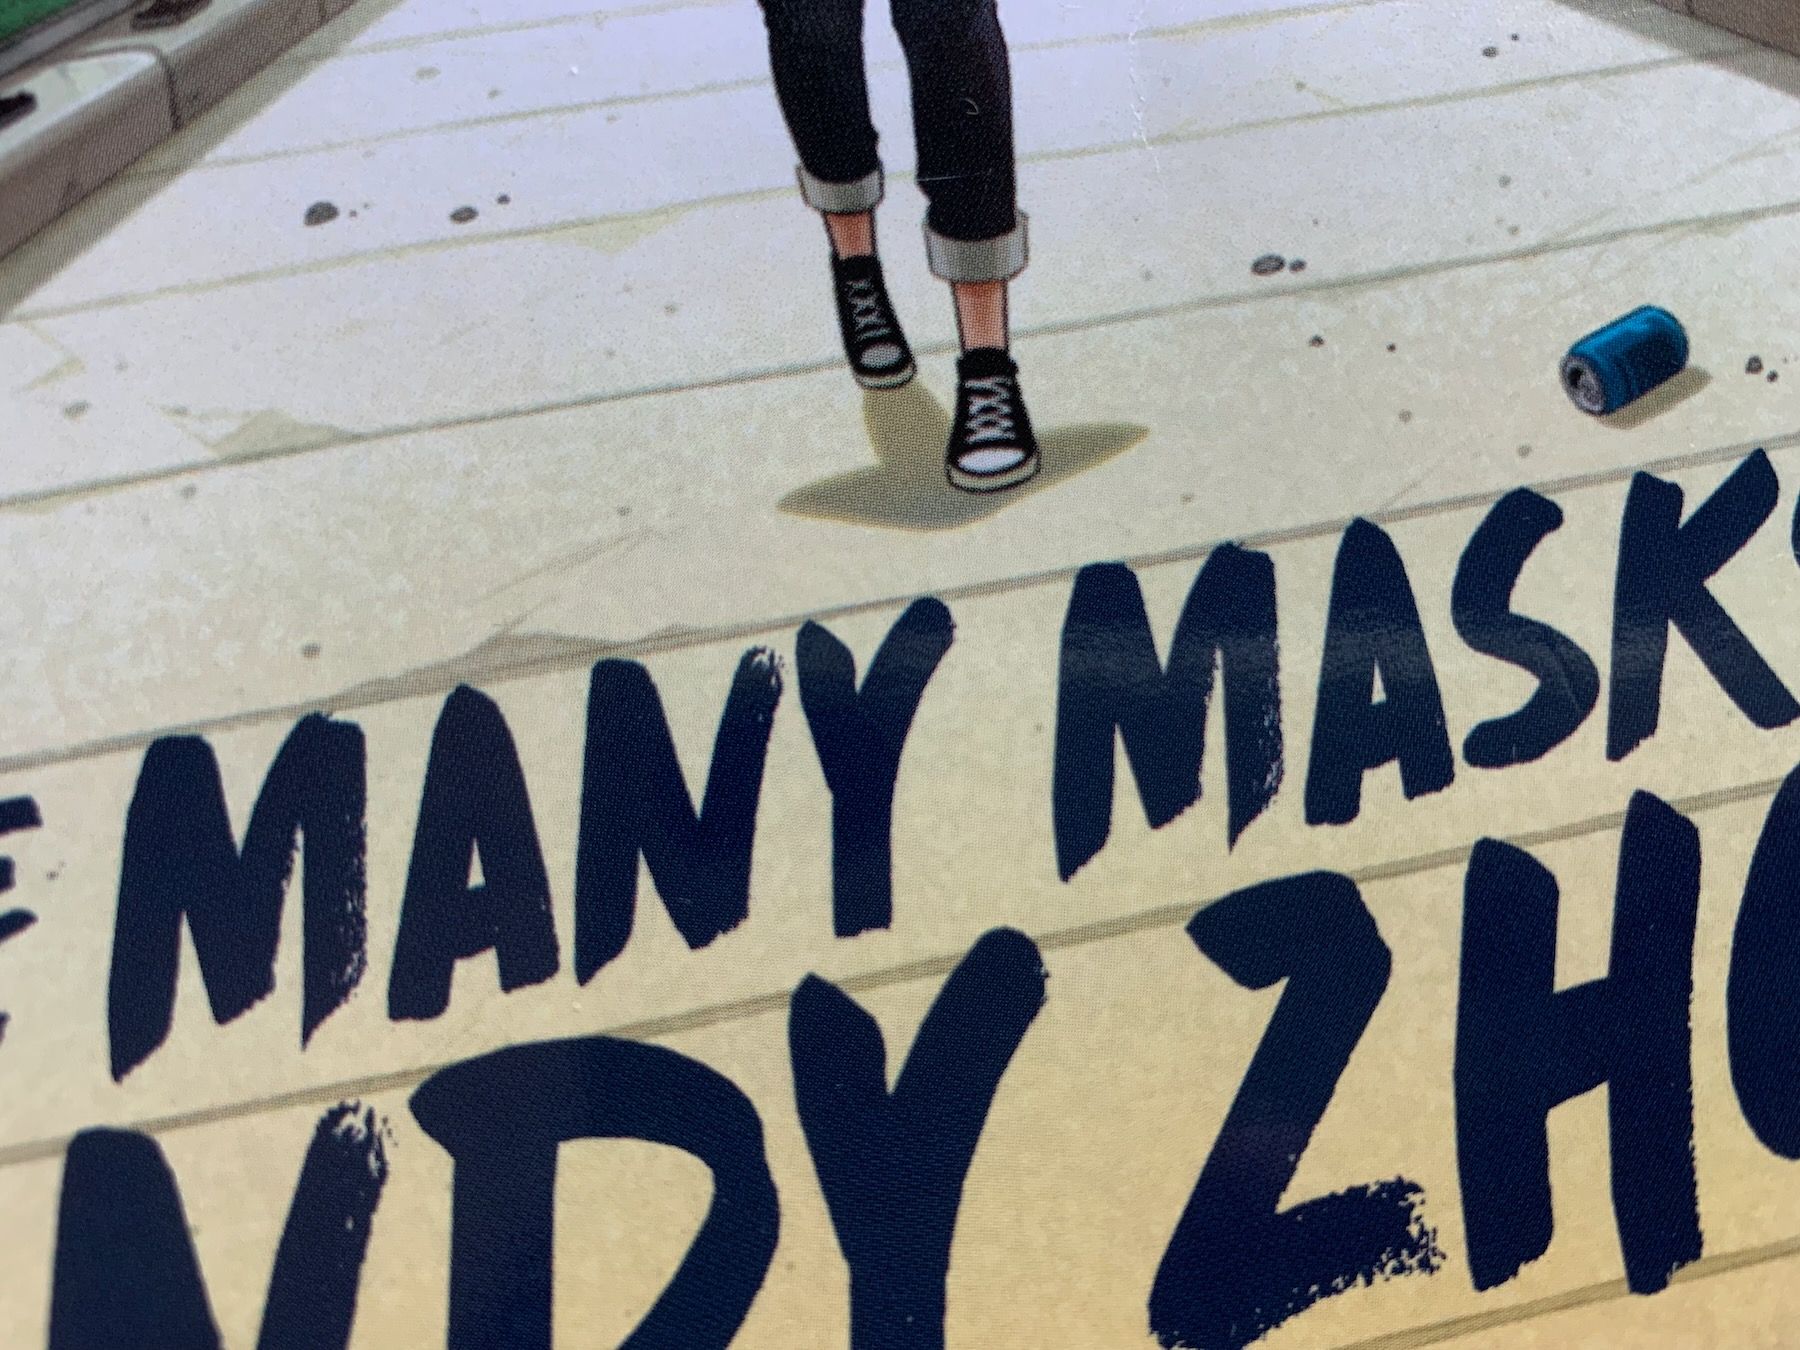 Close-up crop of cover with sneakers, pop can, and letters MANY MASK NDY ZH visible.